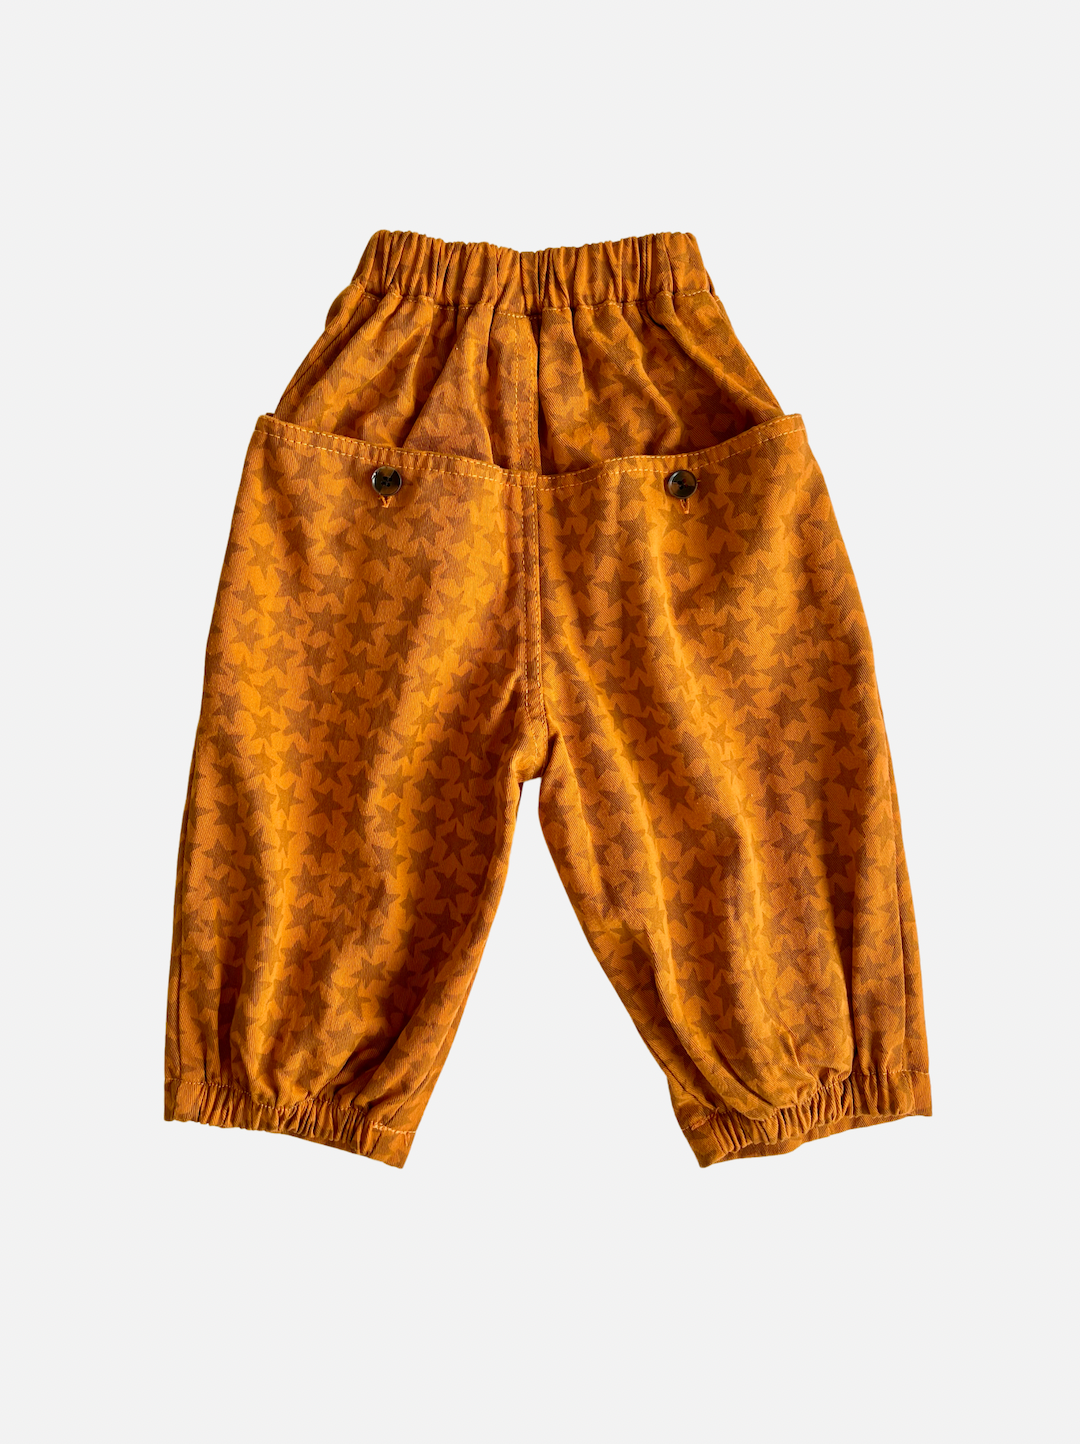 Rust | A pair of kids' pants in orange with rust star pattern and buttoned back pockets, rear view